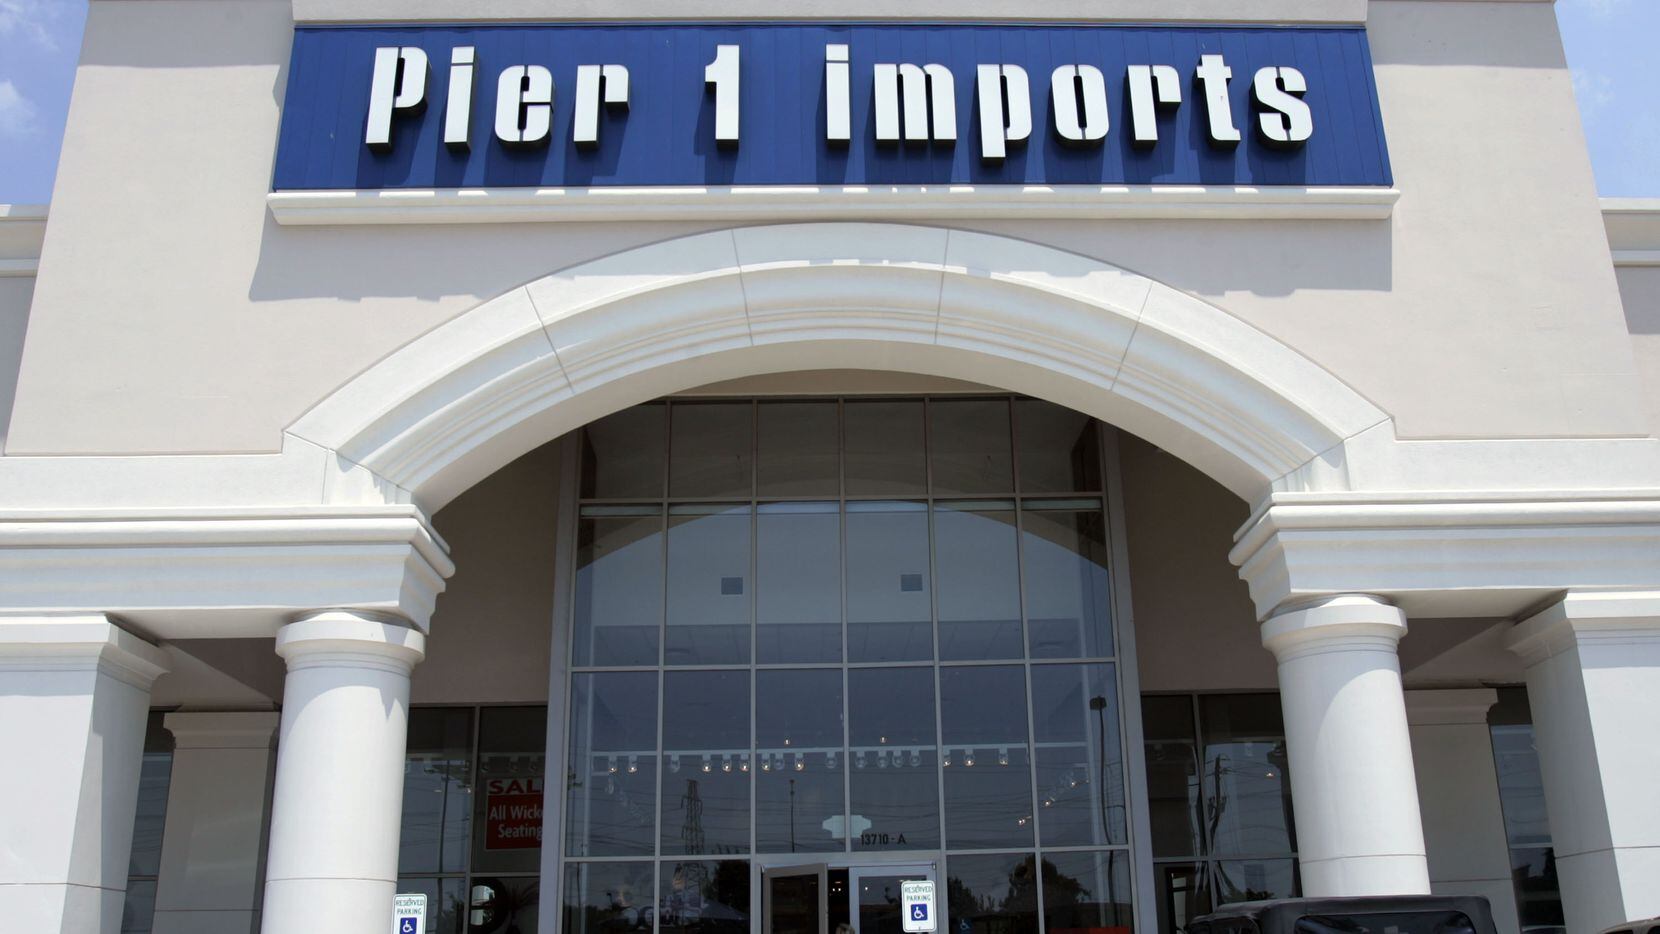 A Pier 1 Imports store is shown in Dallas, Thursday, June 15, 2005. Home furnishings...